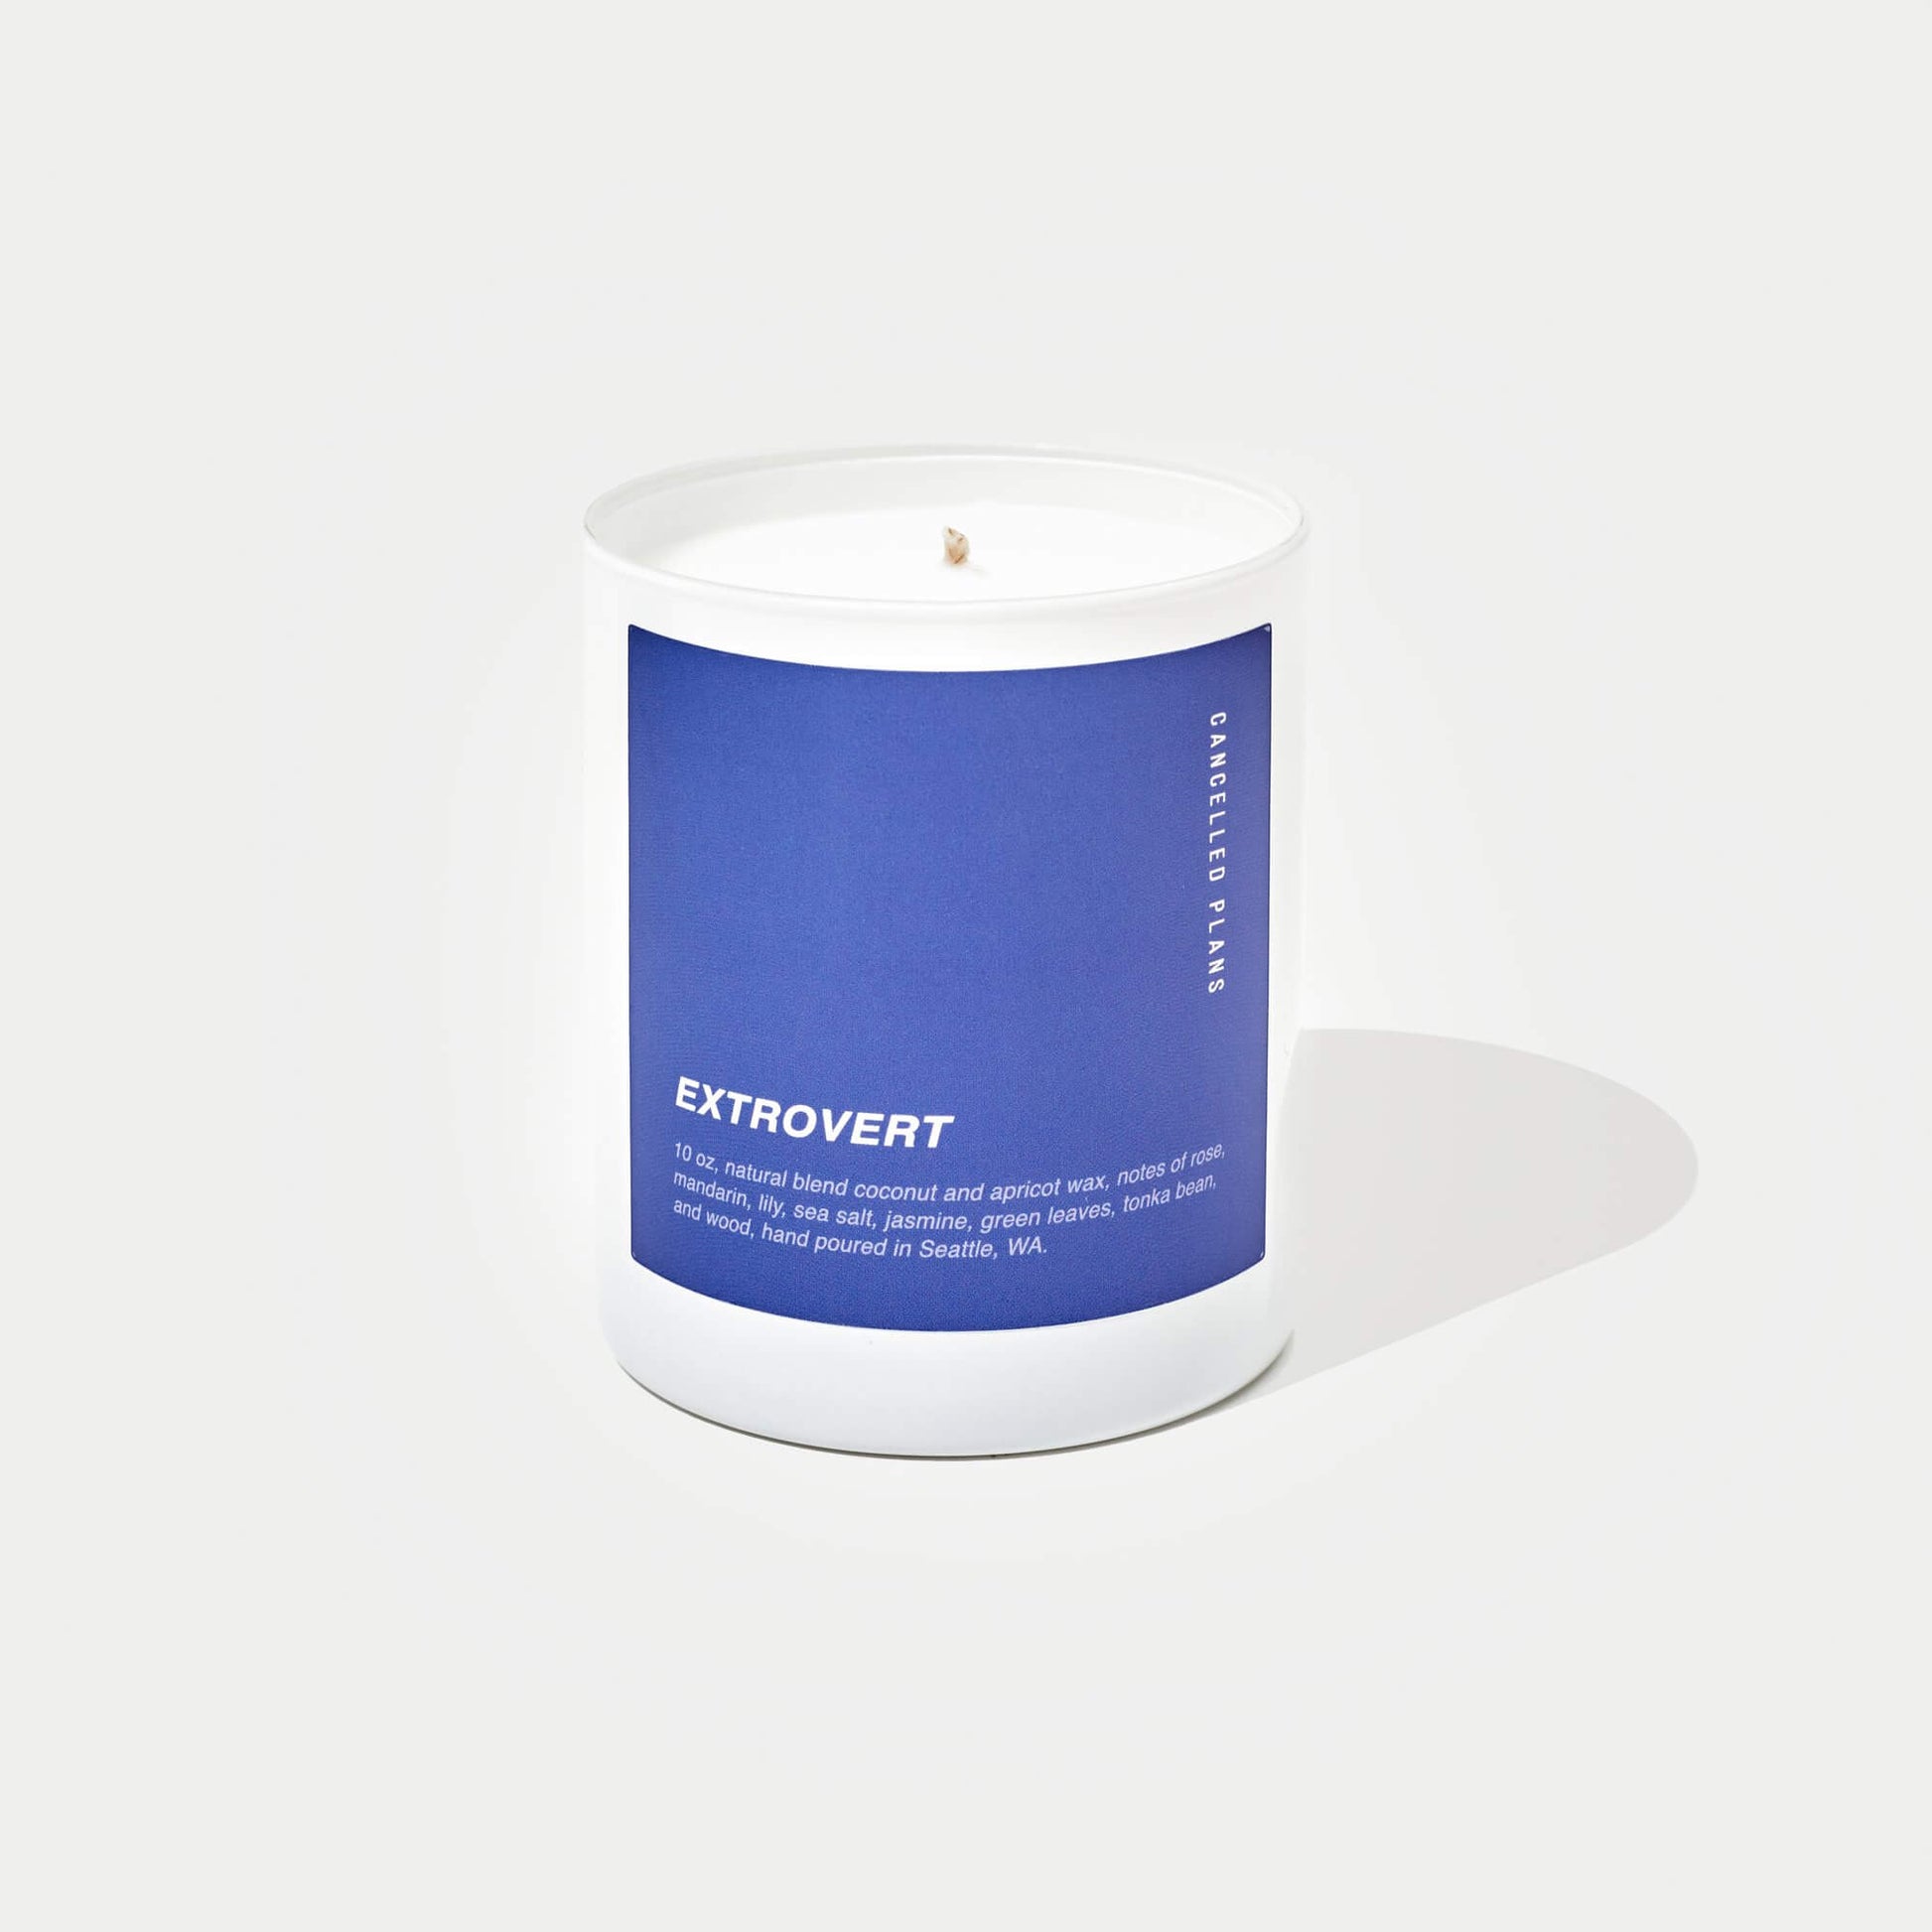 Extrovert Scented Candle by Cancelled Plans